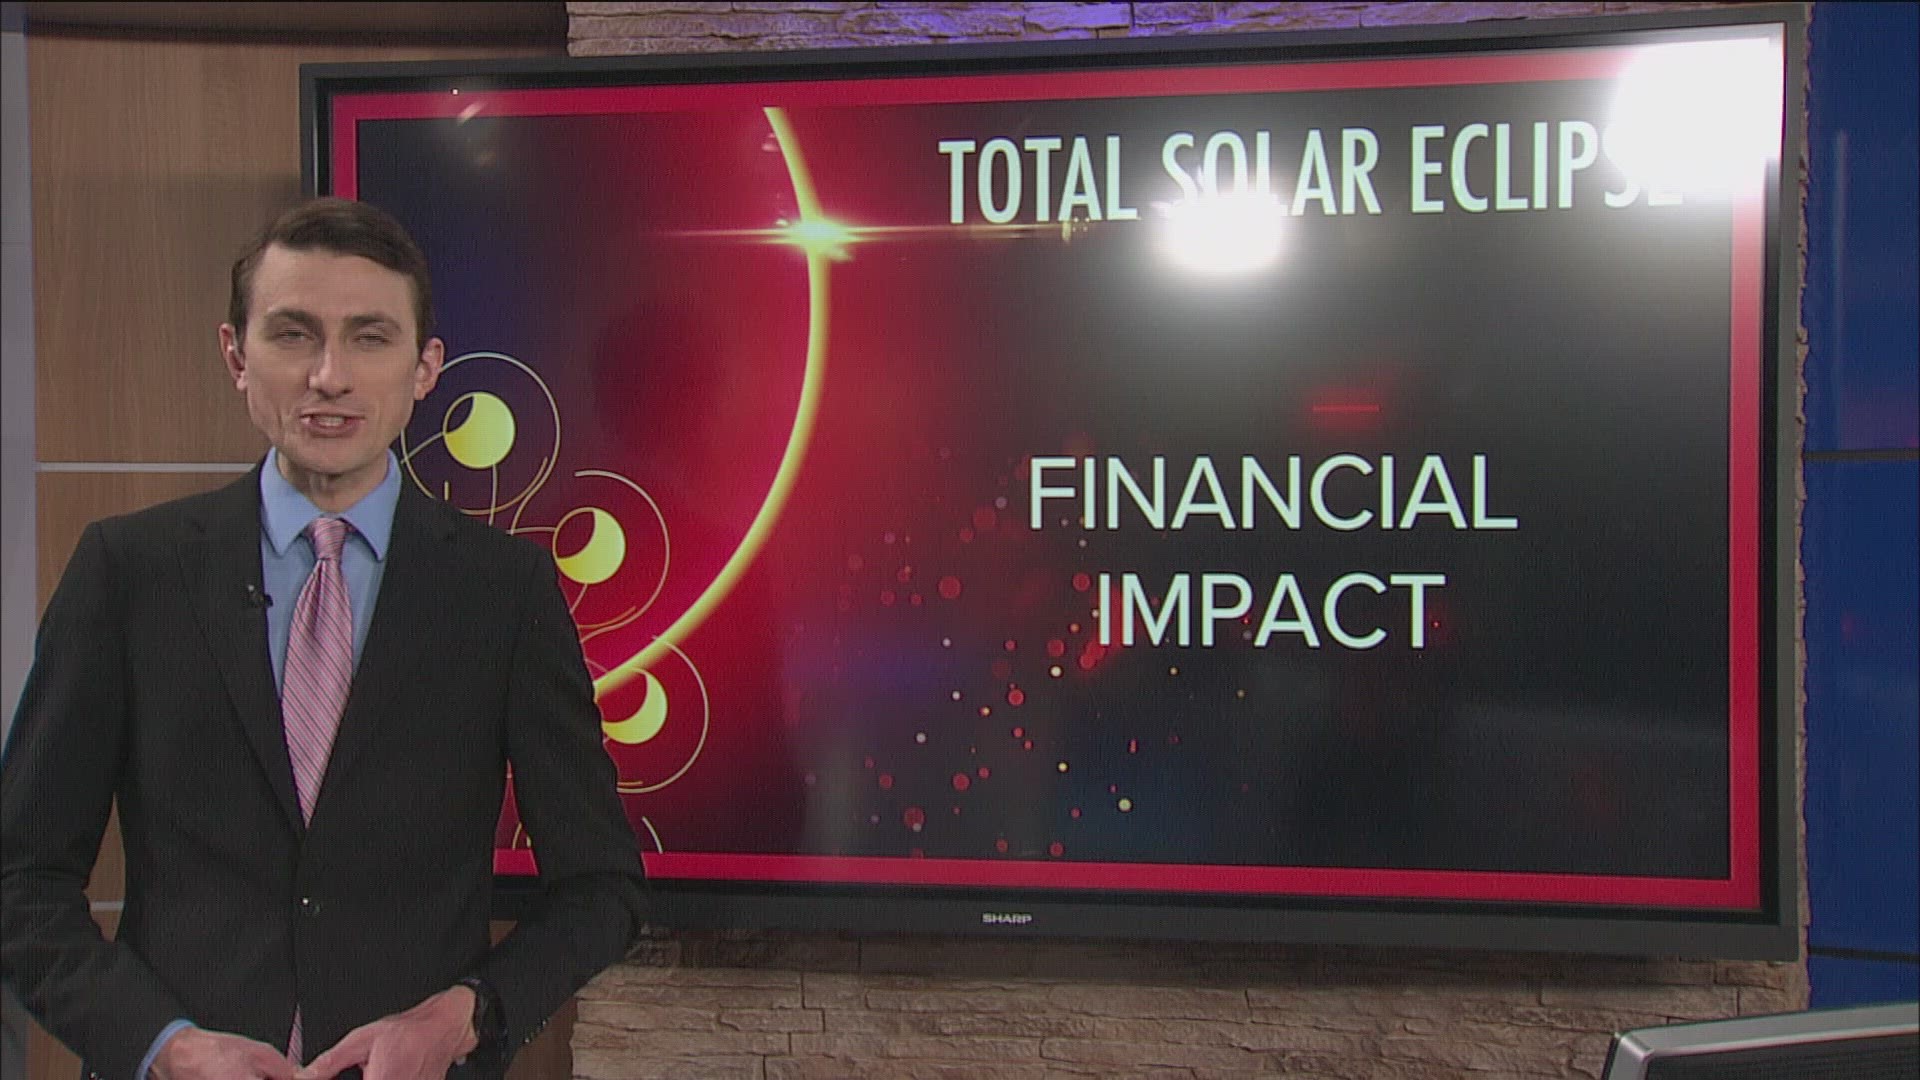 WTOL 11 Meteorologist John Burchfield examines the financial impacts a total solar eclipse can have on communities.